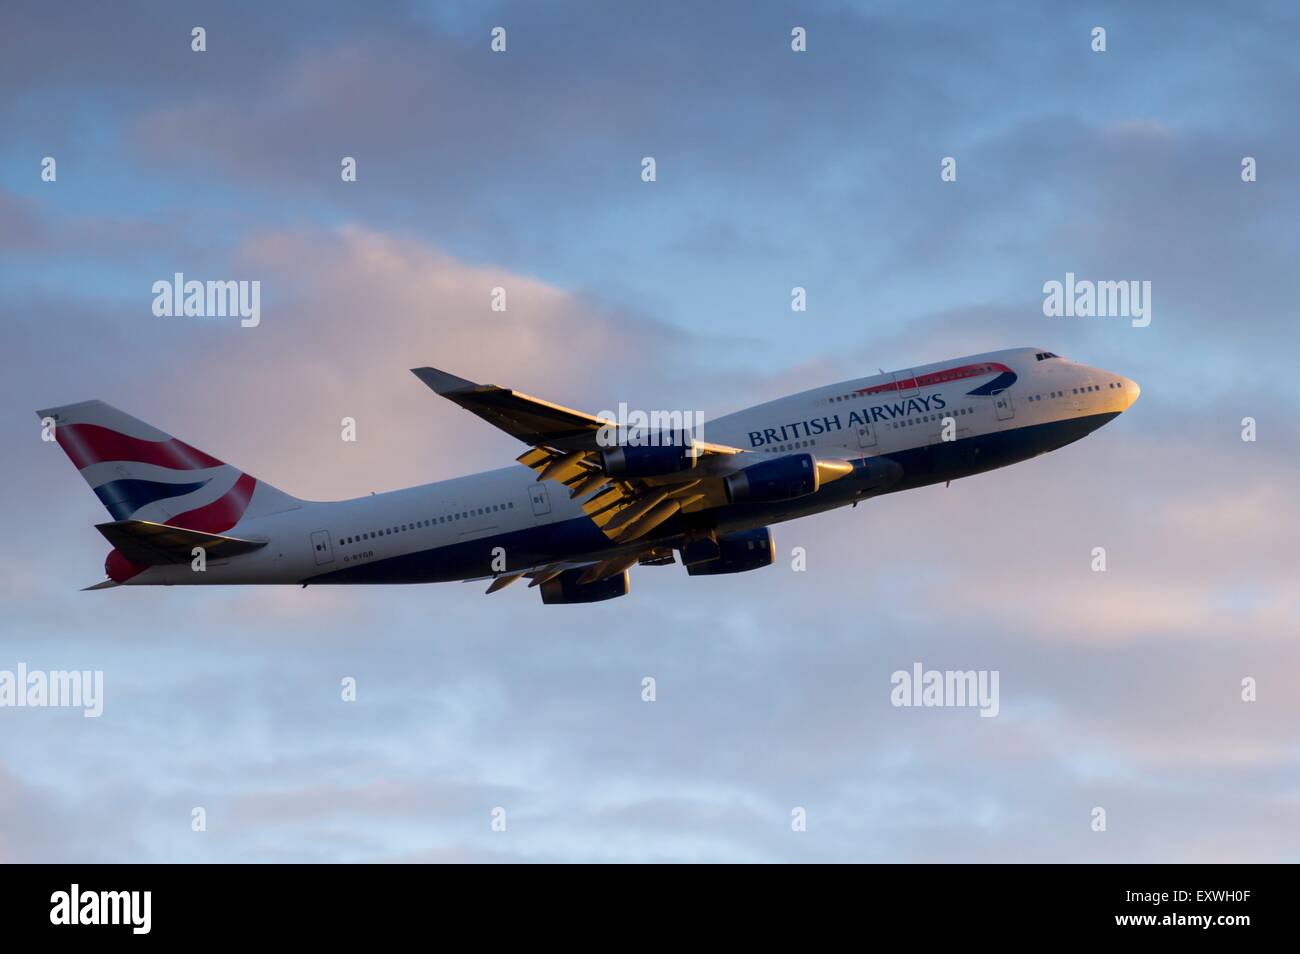 Boing 747 in clouds Stock Photo